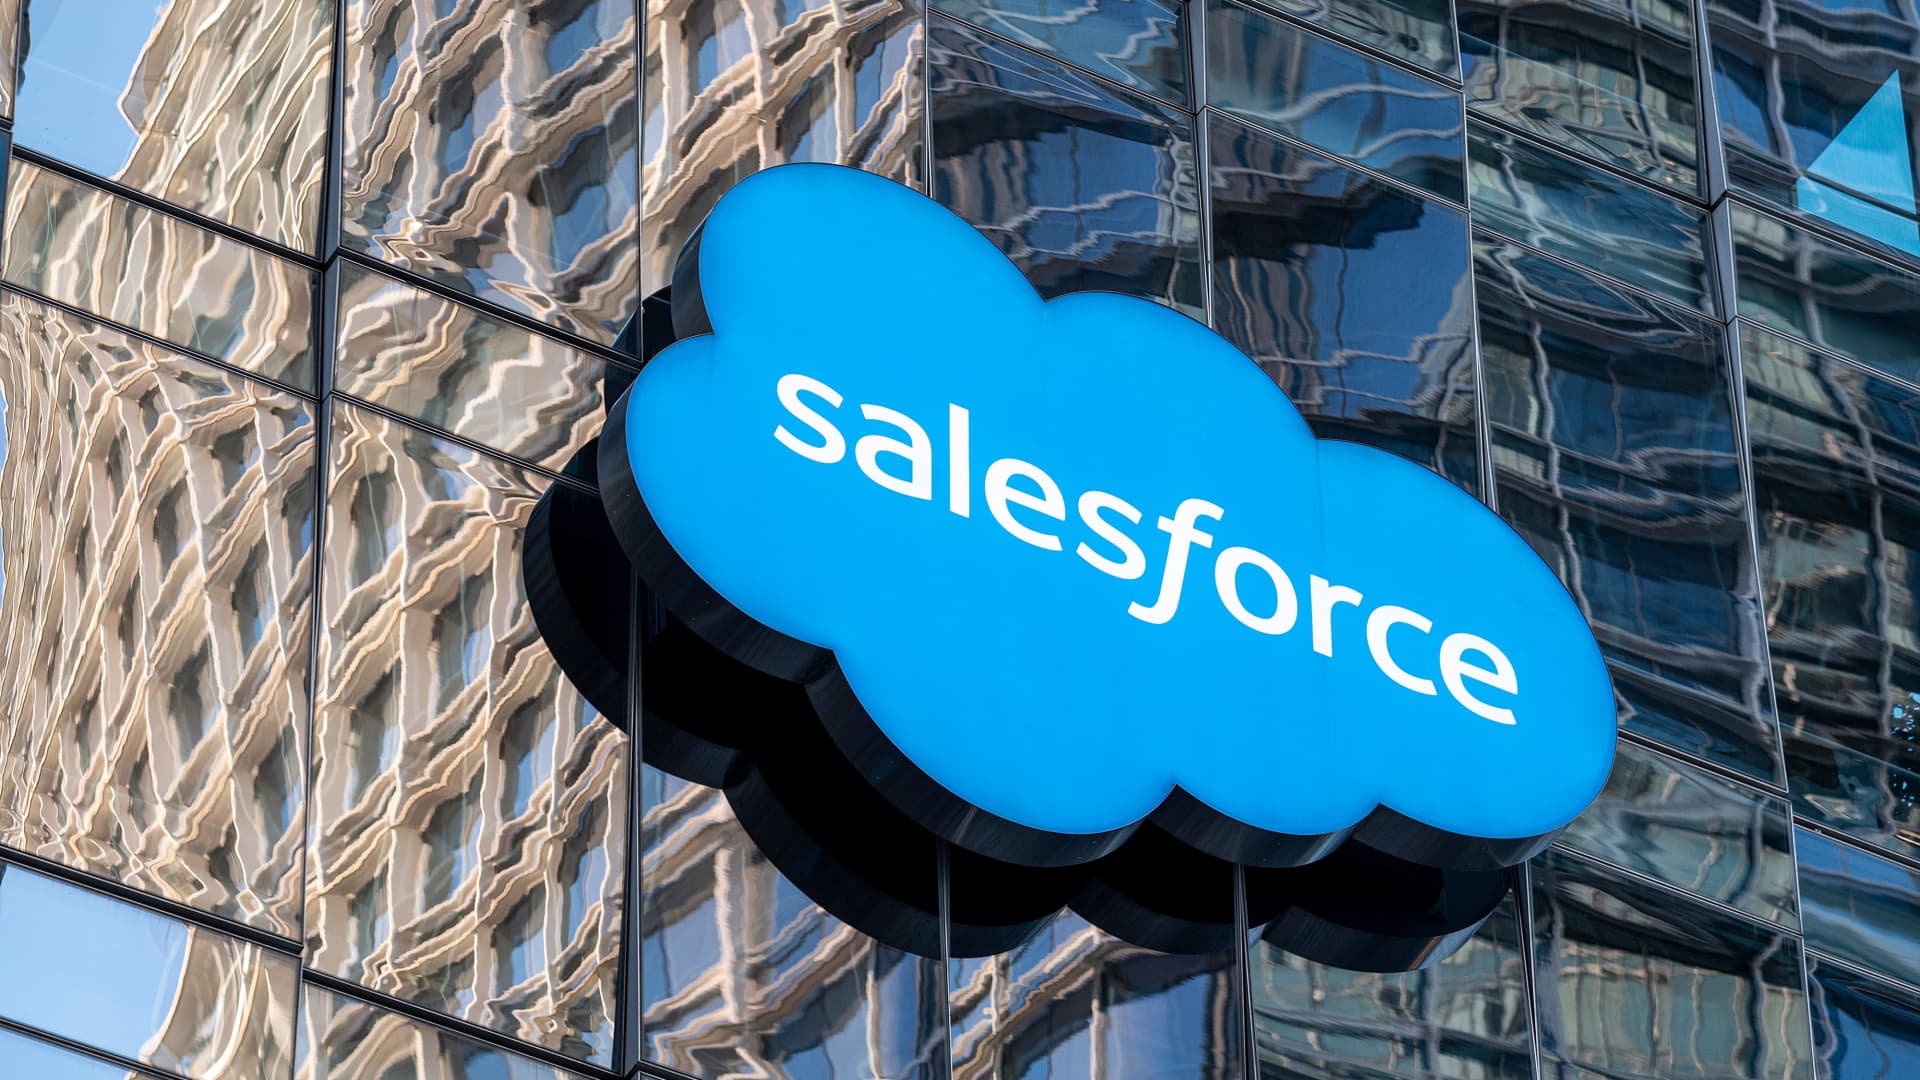 Salesforce is cutting 10% of its workforce, more than 7,000 employees